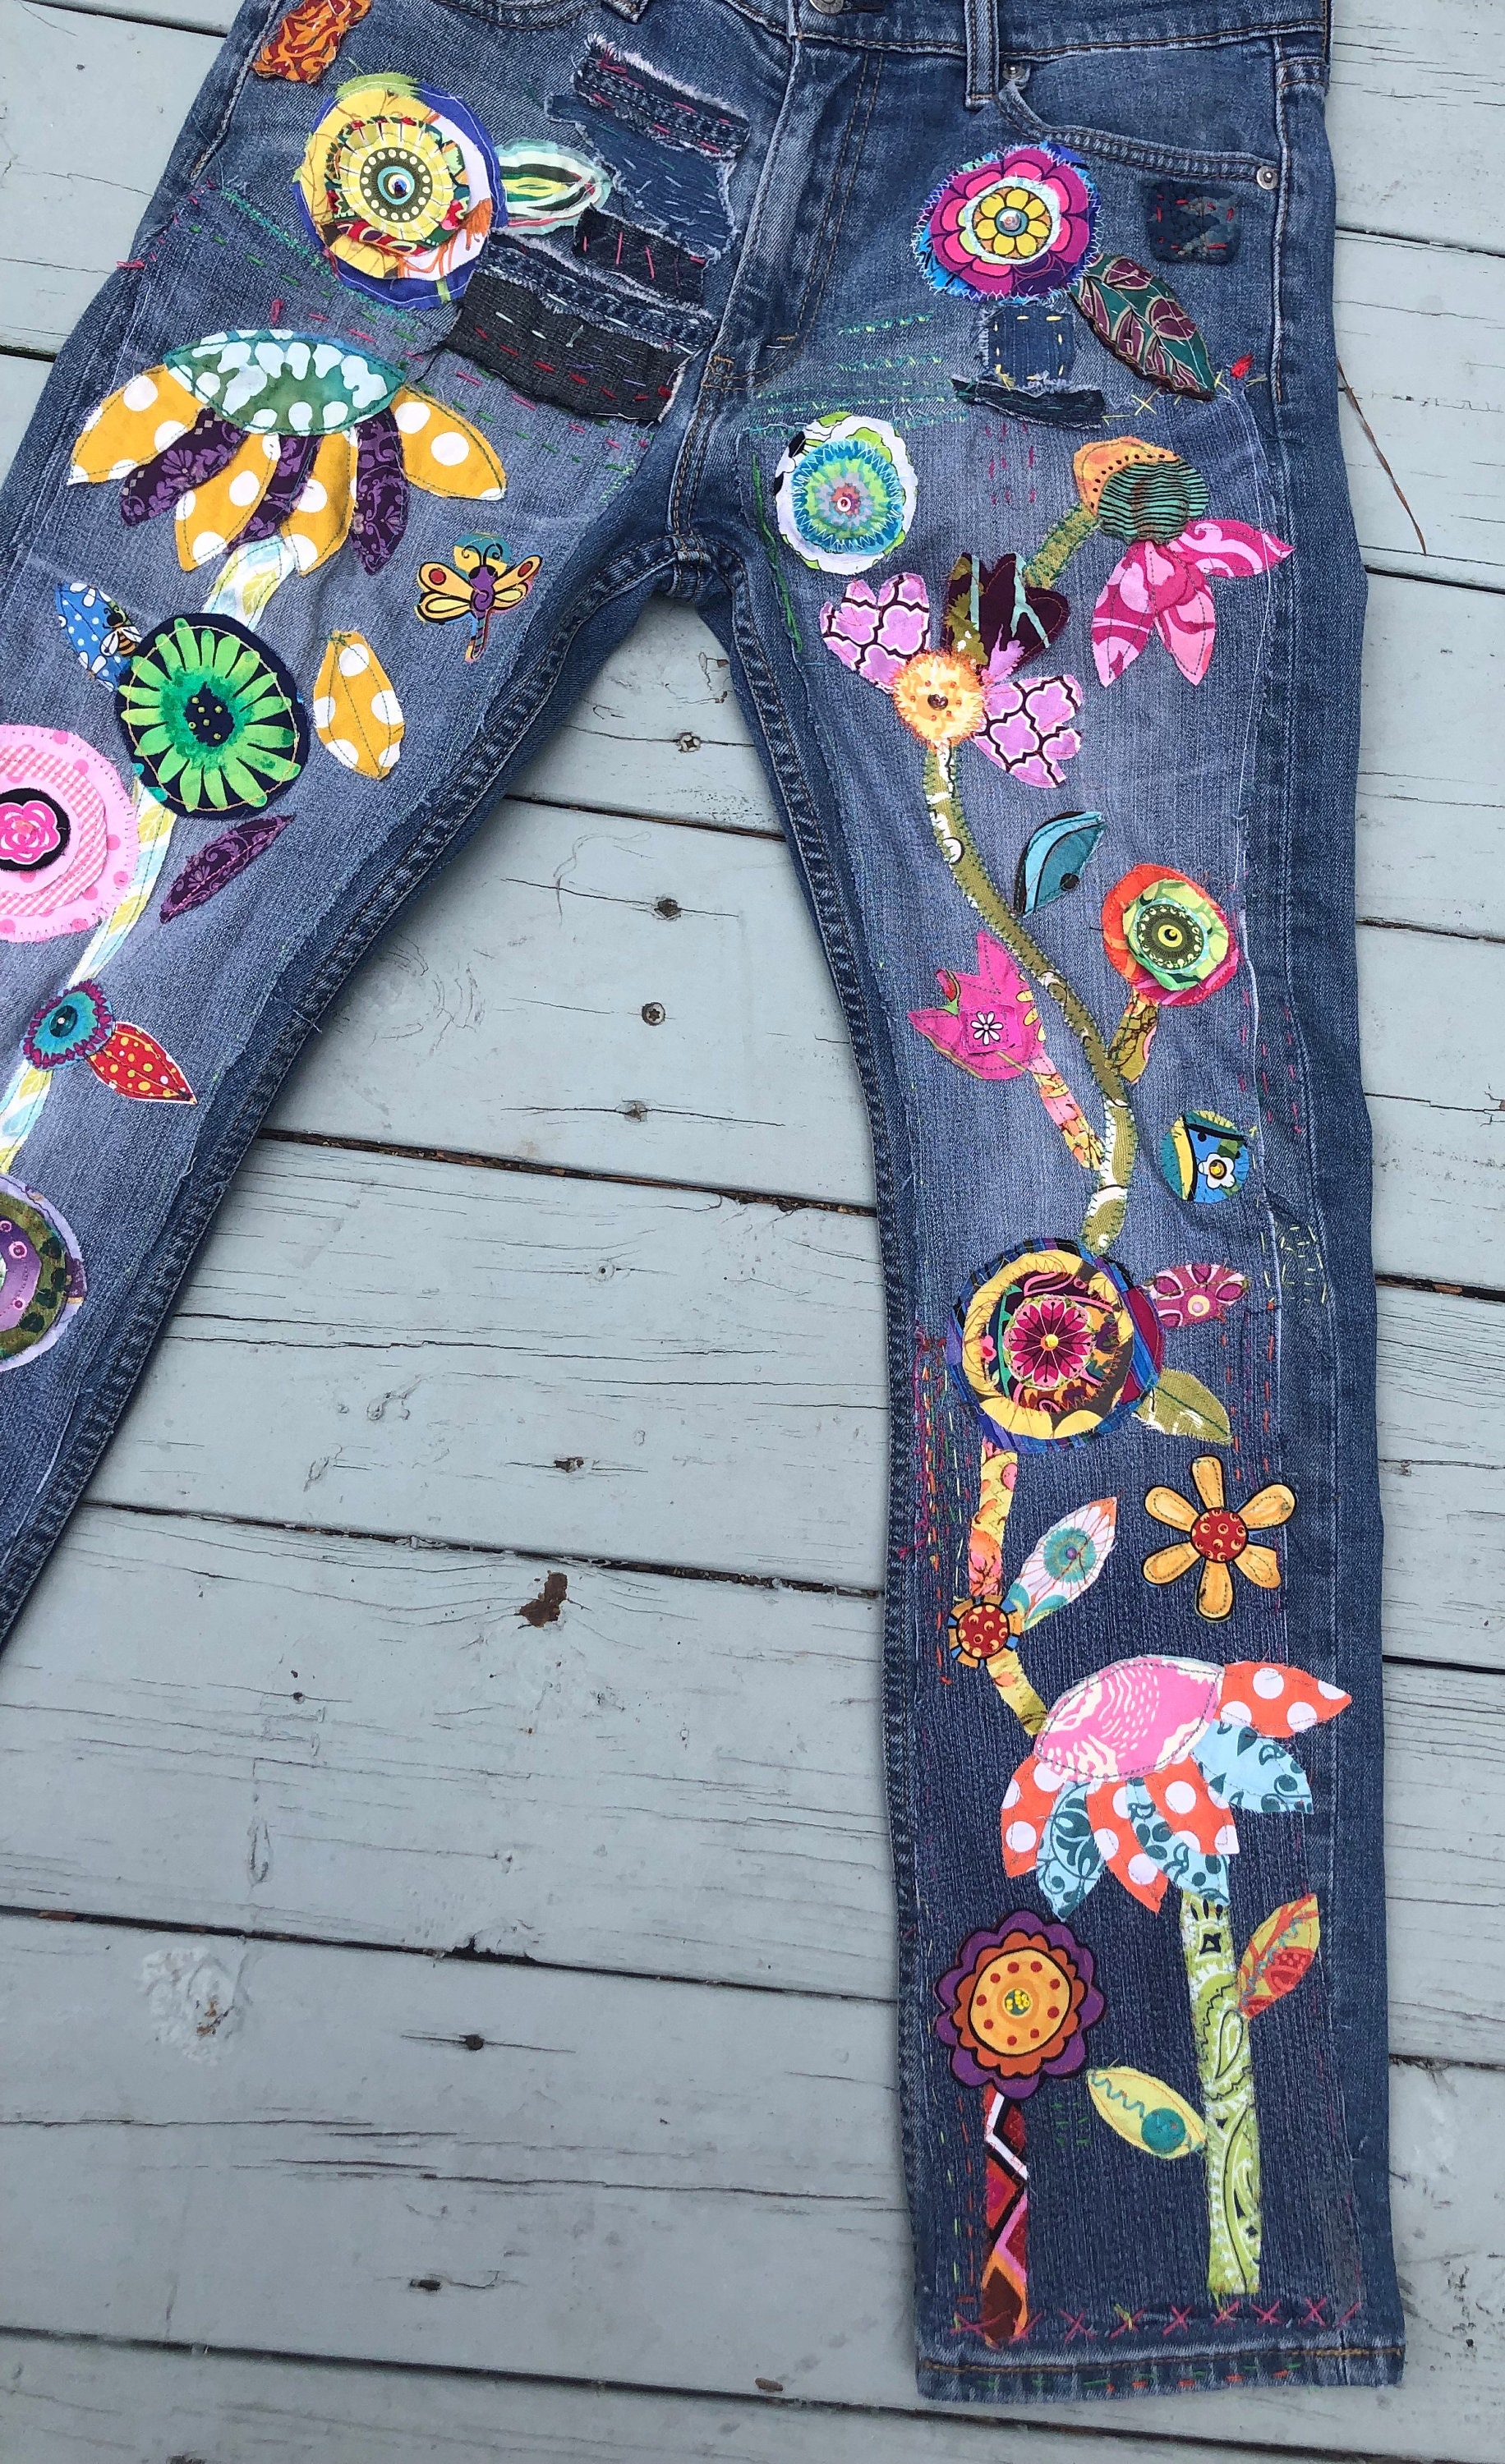 Custom Hippie Boho Denim Patchwork Jeans Made to Order Recycled Retro  Distressed Jeans Music Festival 